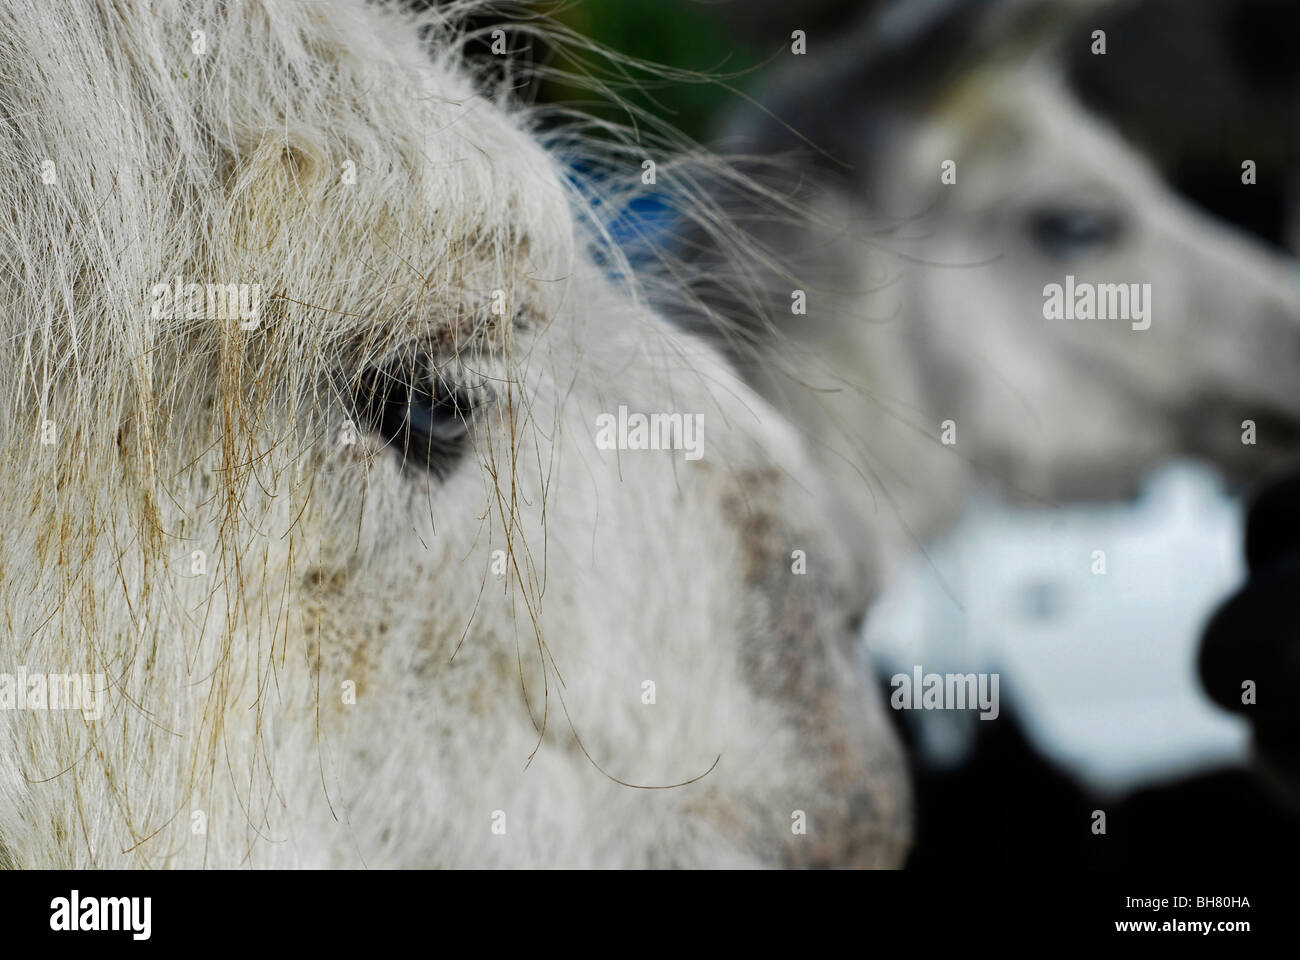 Ecuador, Saquisili, close-up of white lamas with their clear blue eyes at the livestock market Stock Photo